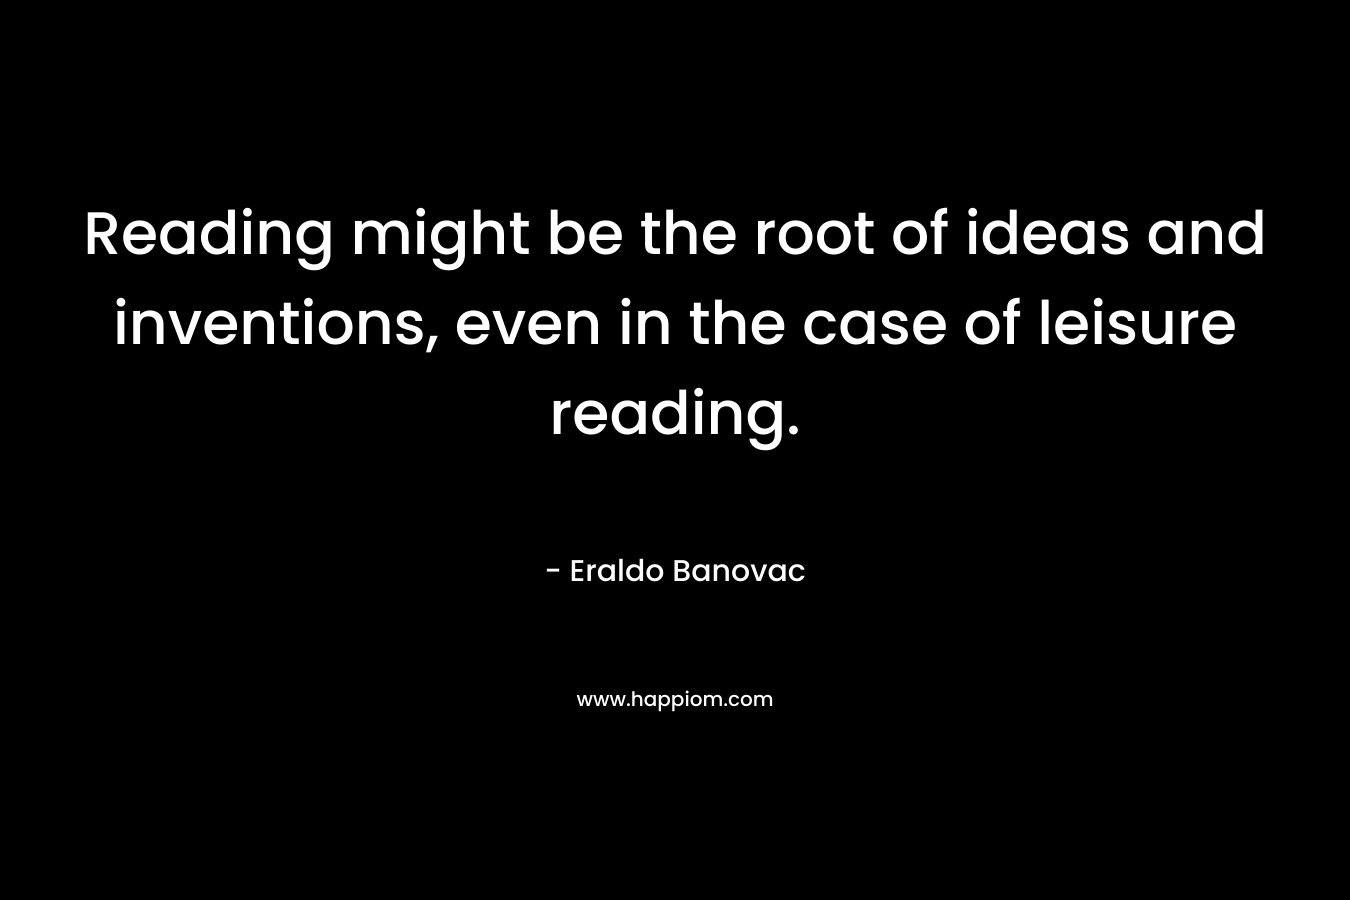 Reading might be the root of ideas and inventions, even in the case of leisure reading. – Eraldo Banovac